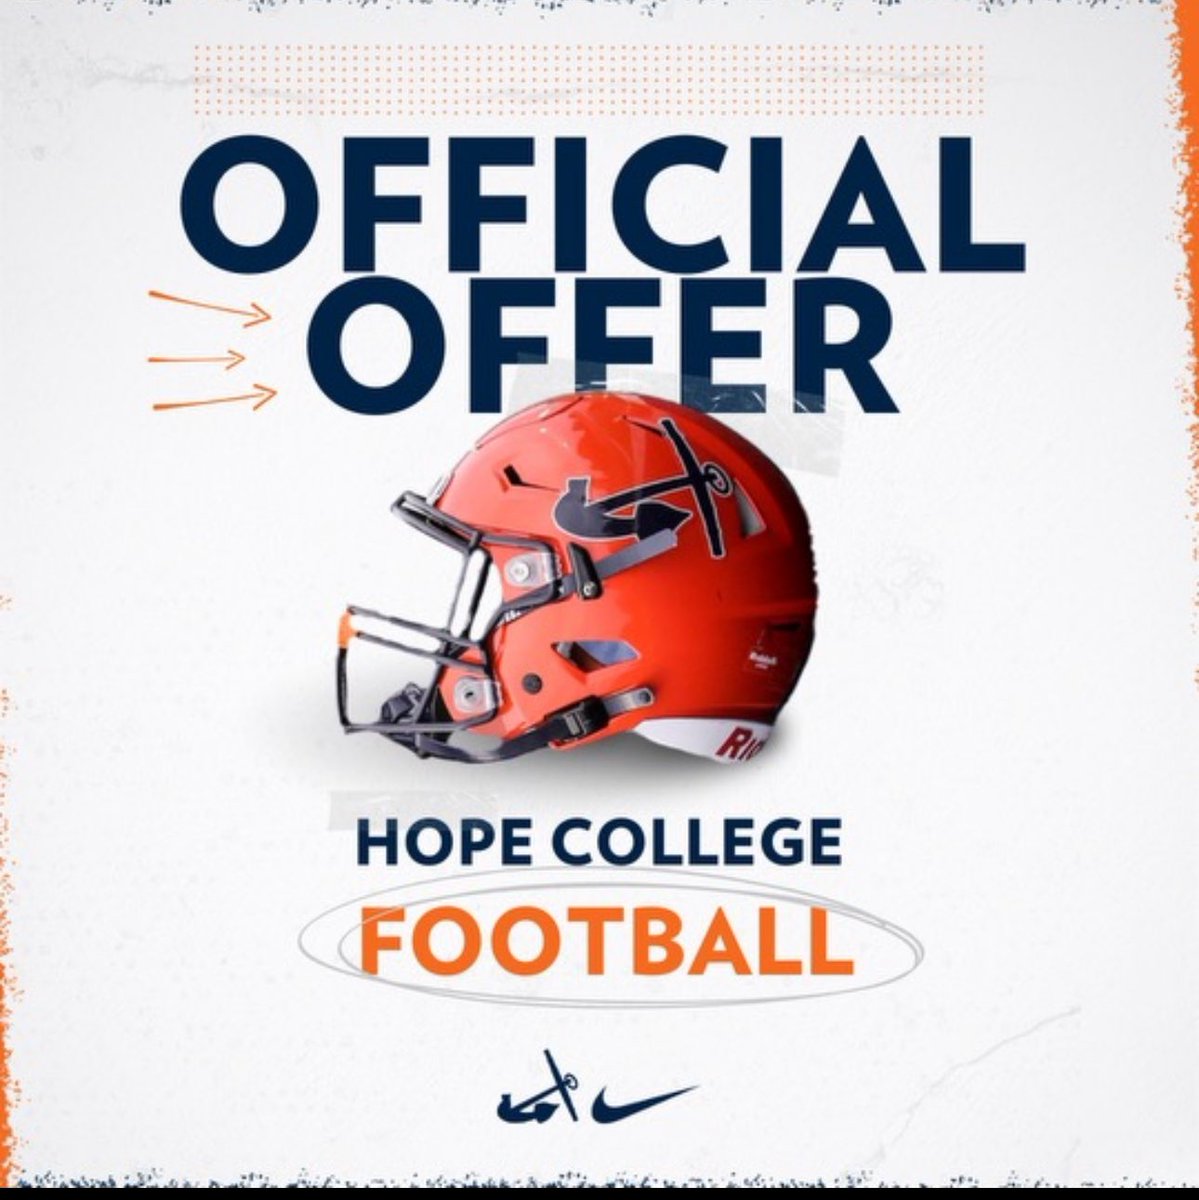 #AGTG After a great talk with @jacobpardonnet I’ve been blessed to receive an offer from Hope College! @PStuursm @Coach_HThompson @CoachJGendron @GSDathletics @CoachSweany @Rye_B_Thats_Me @coachsikora @TheD_Zone @MichFBFrenzy